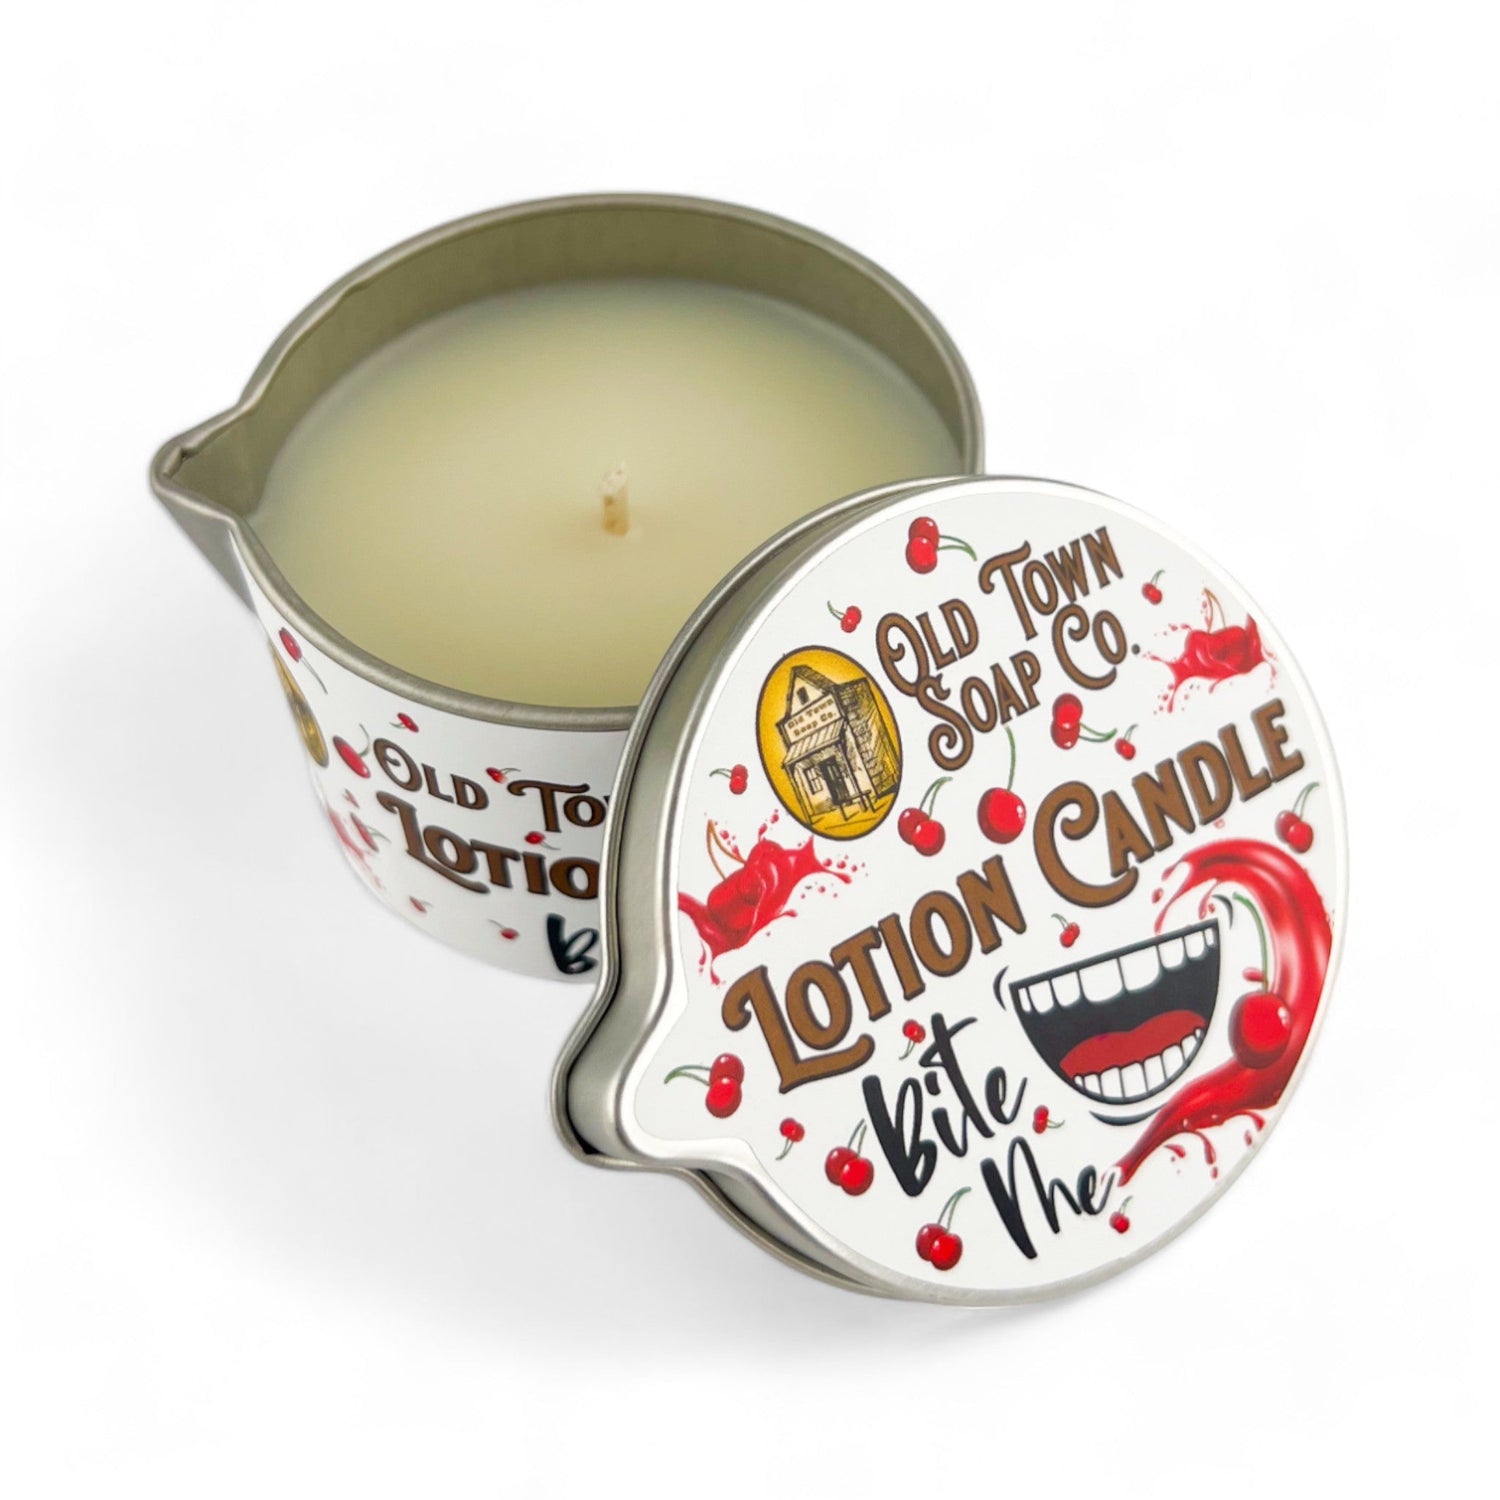 Bite Me -Lotion Candles - Old Town Soap Co.